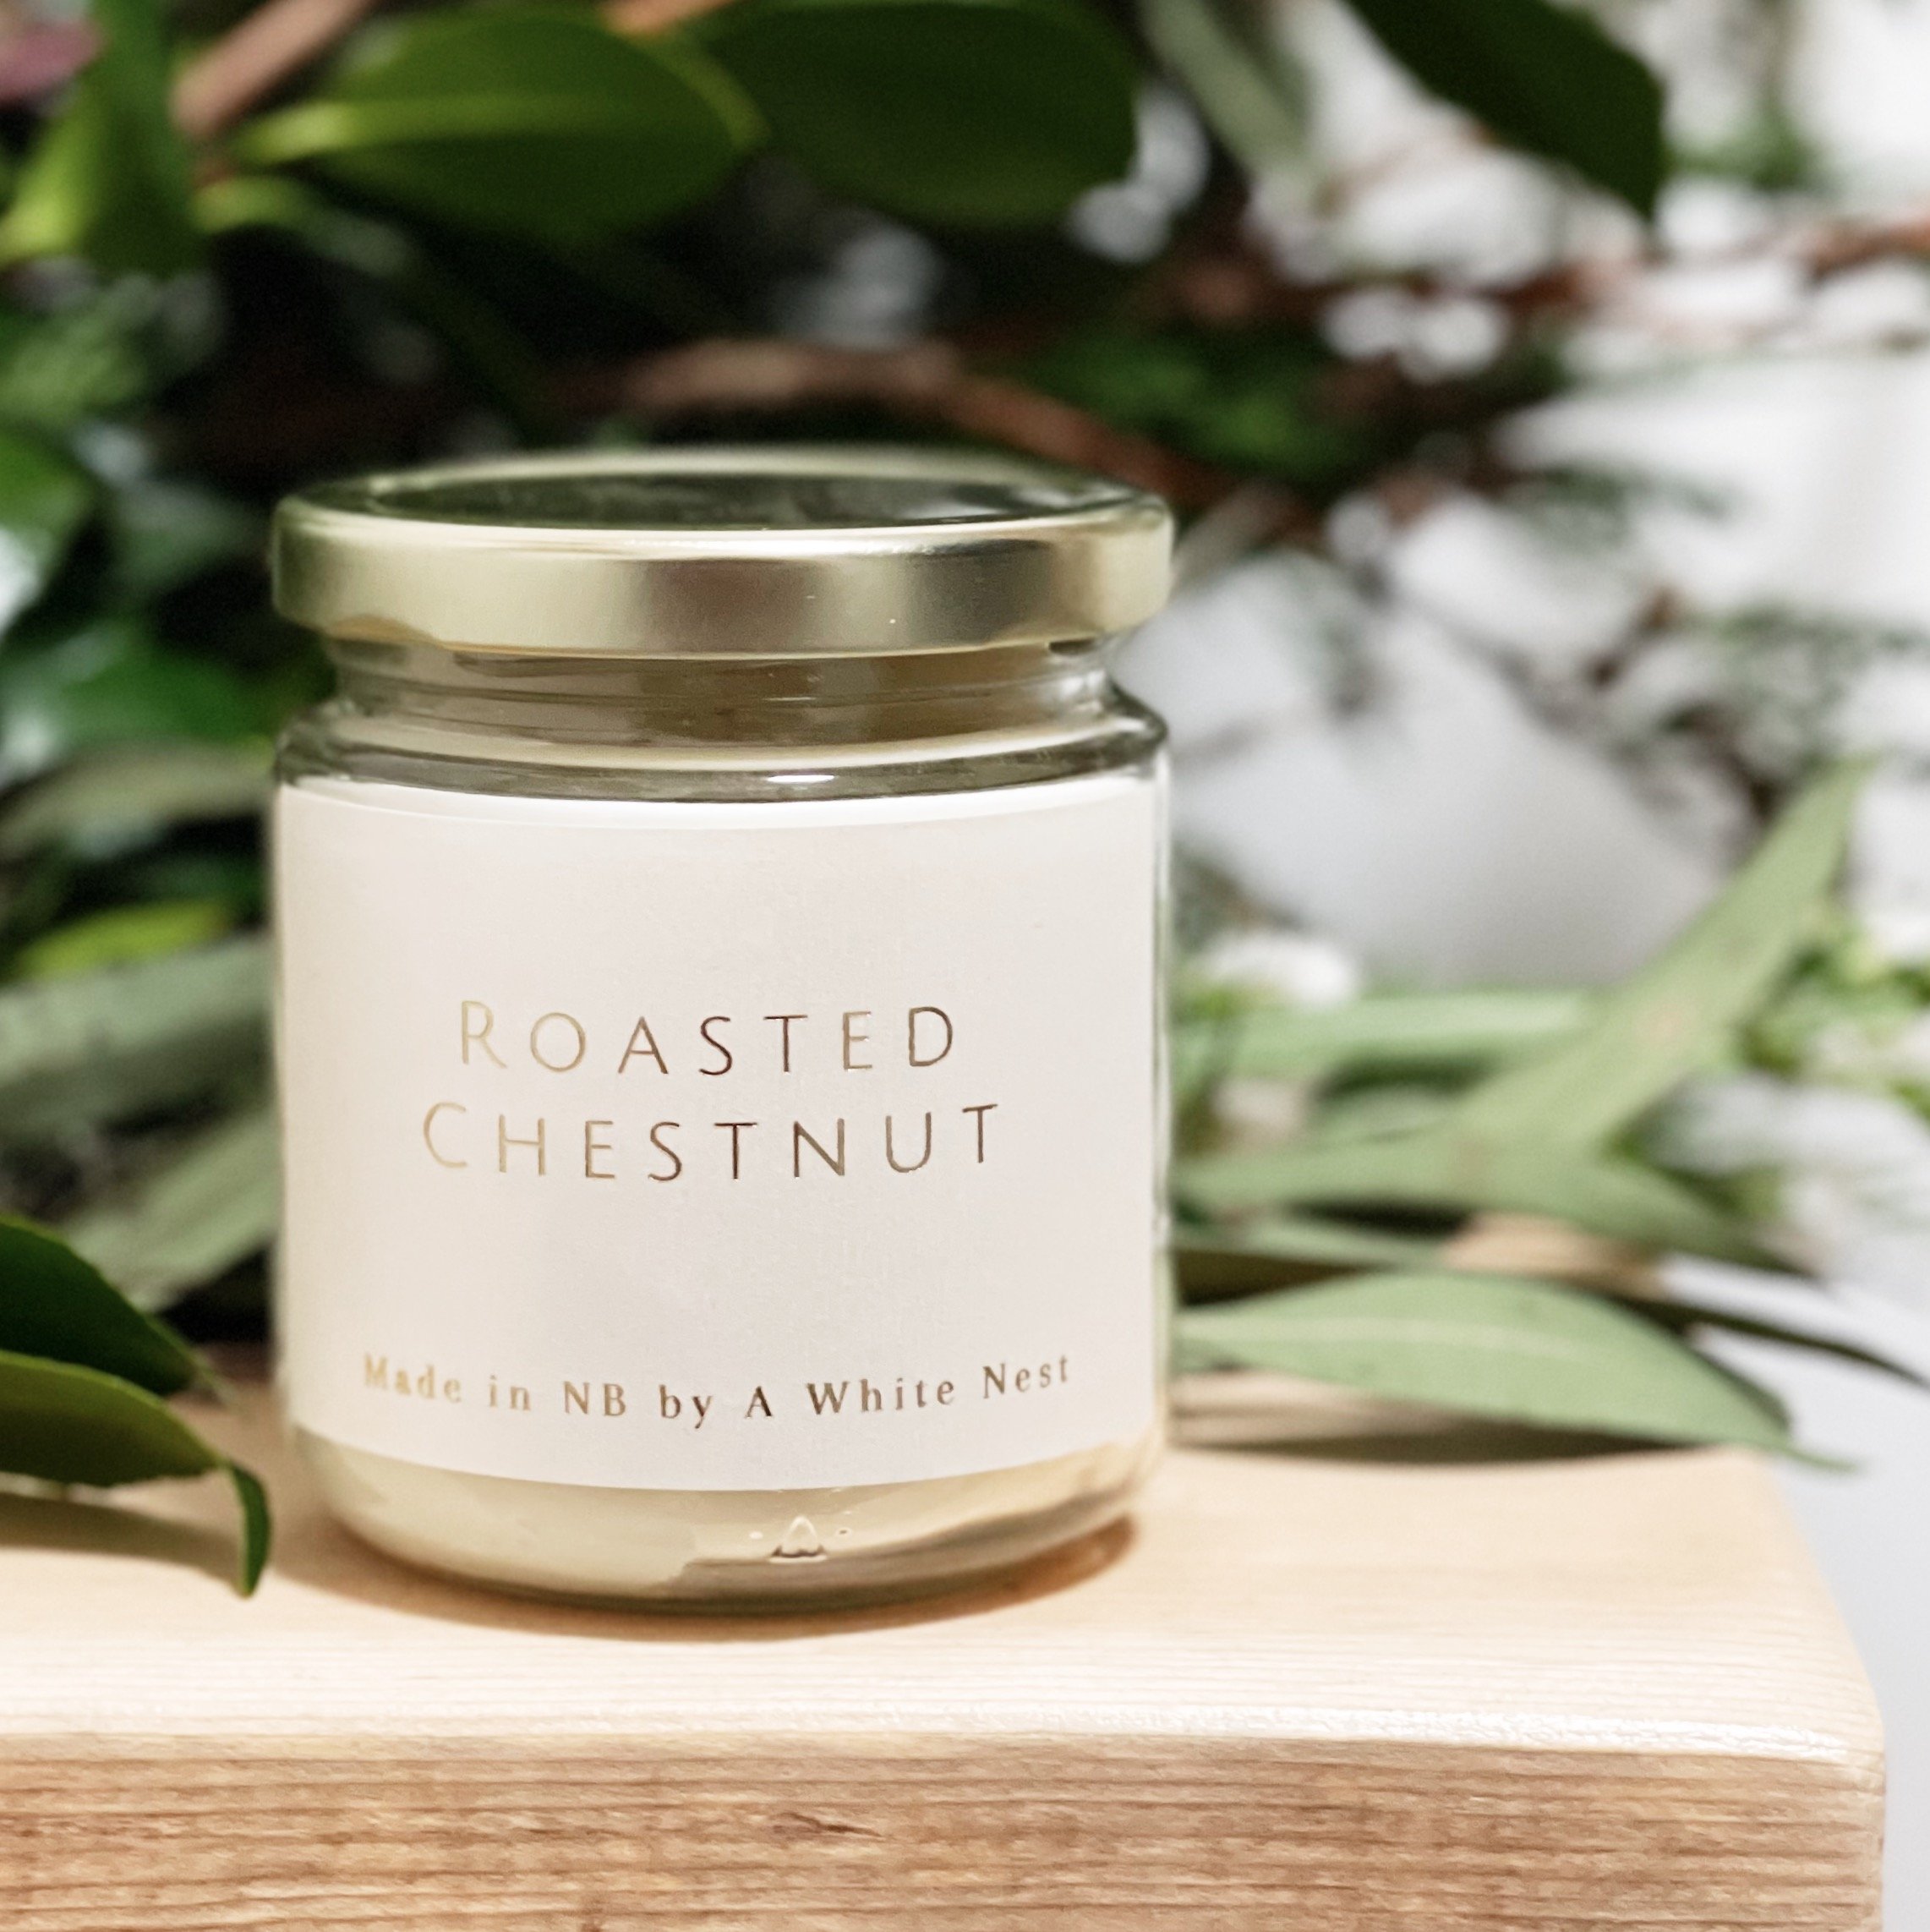 Roasted Chestnut Scented Candle - $20.00